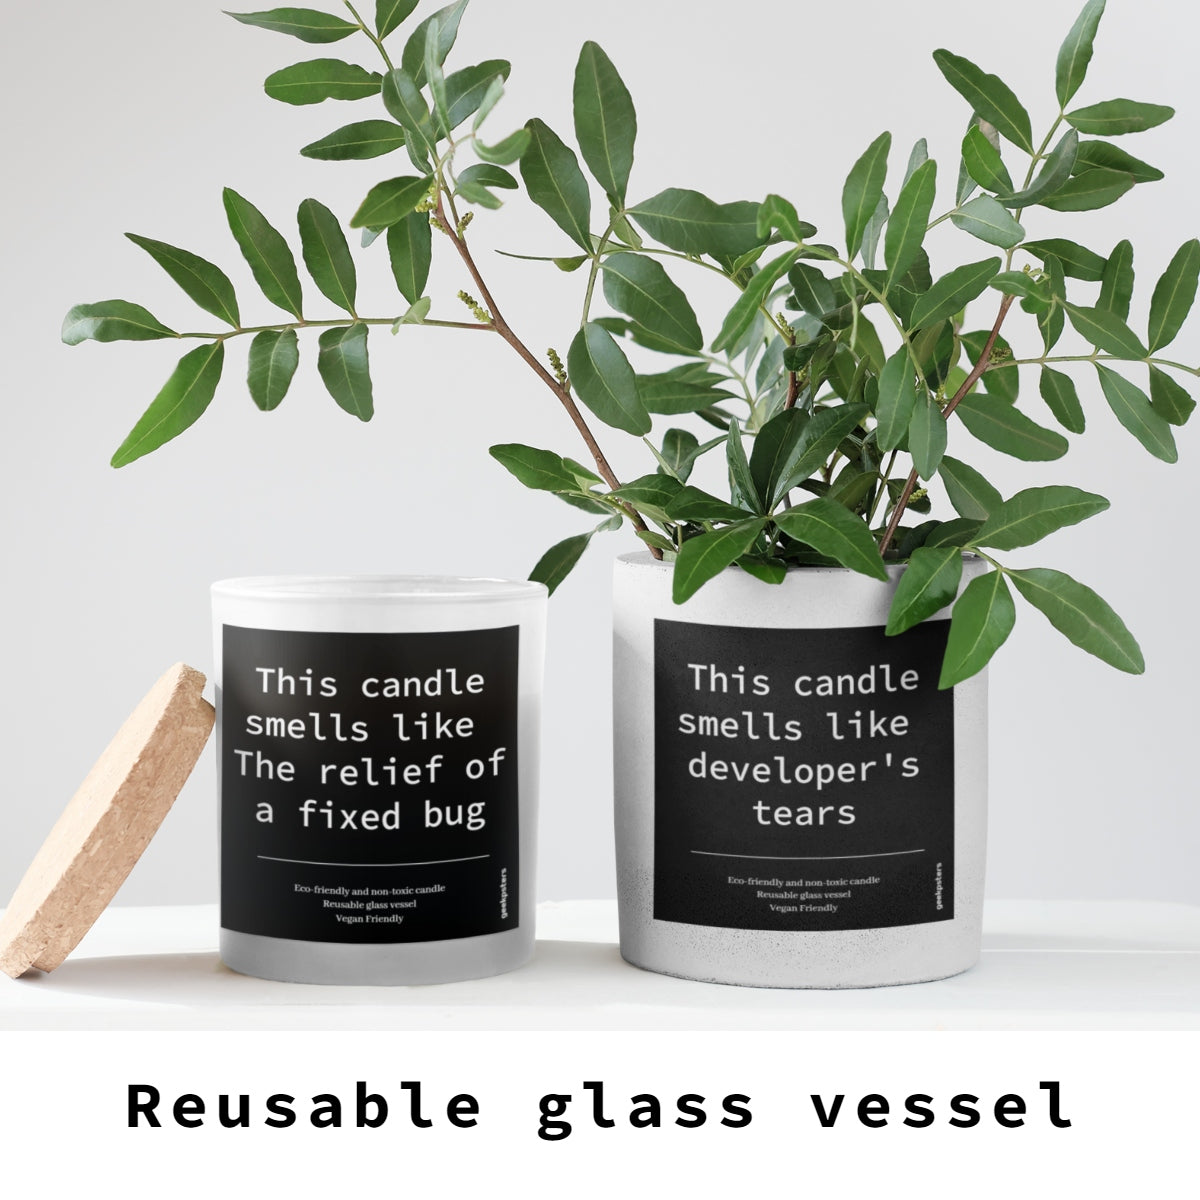 Two Cloud: Its All Sunshine and Rainbow..until its Rain - scented soy candles with humorous labels in reusable glass vessels, accompanied by a green plant and a piece of wood on a light background.